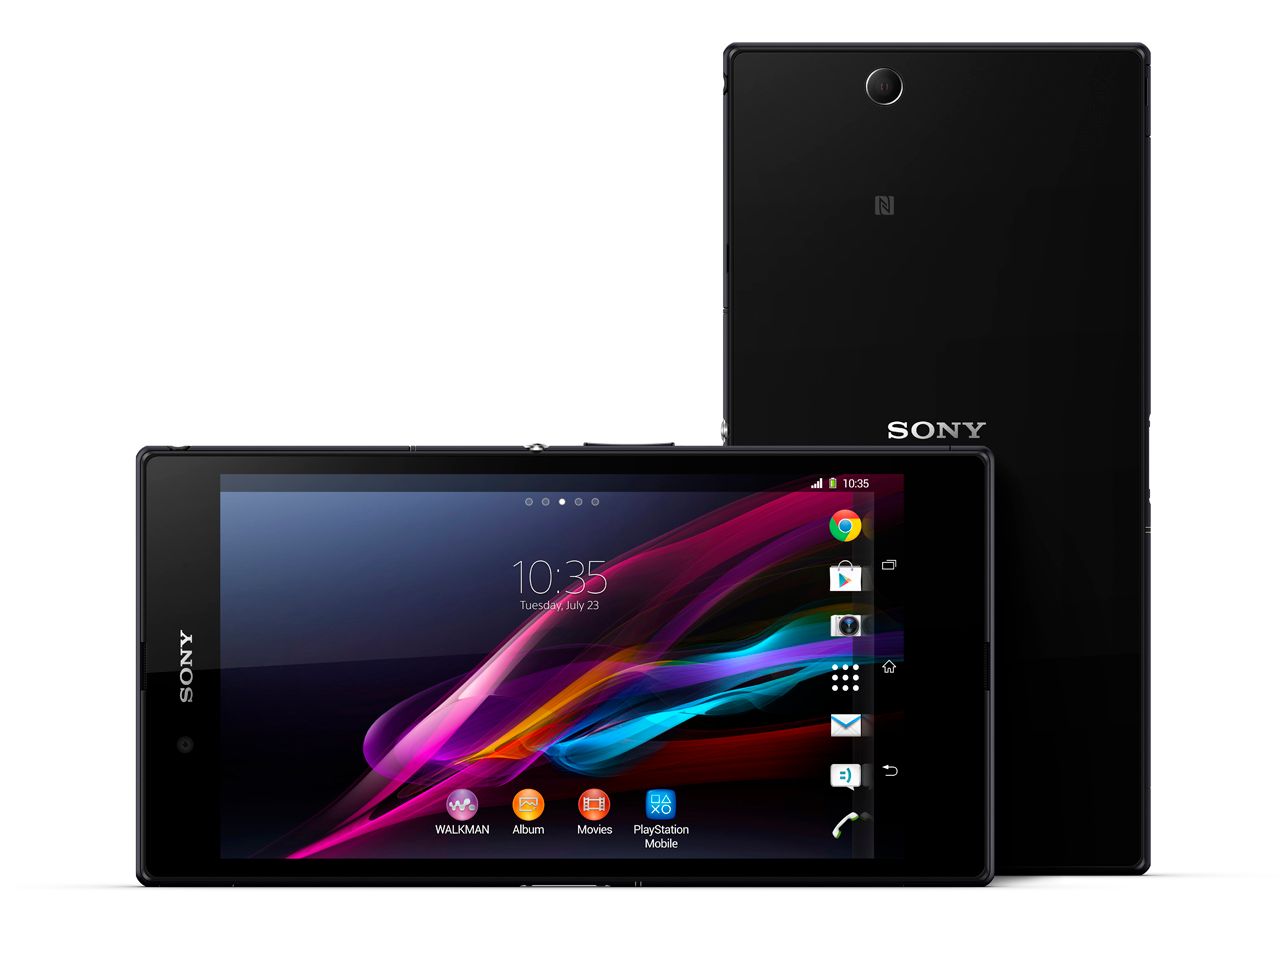 sony xperia z ultra official 6 4 inch snapdragon 800 android phablet image 1